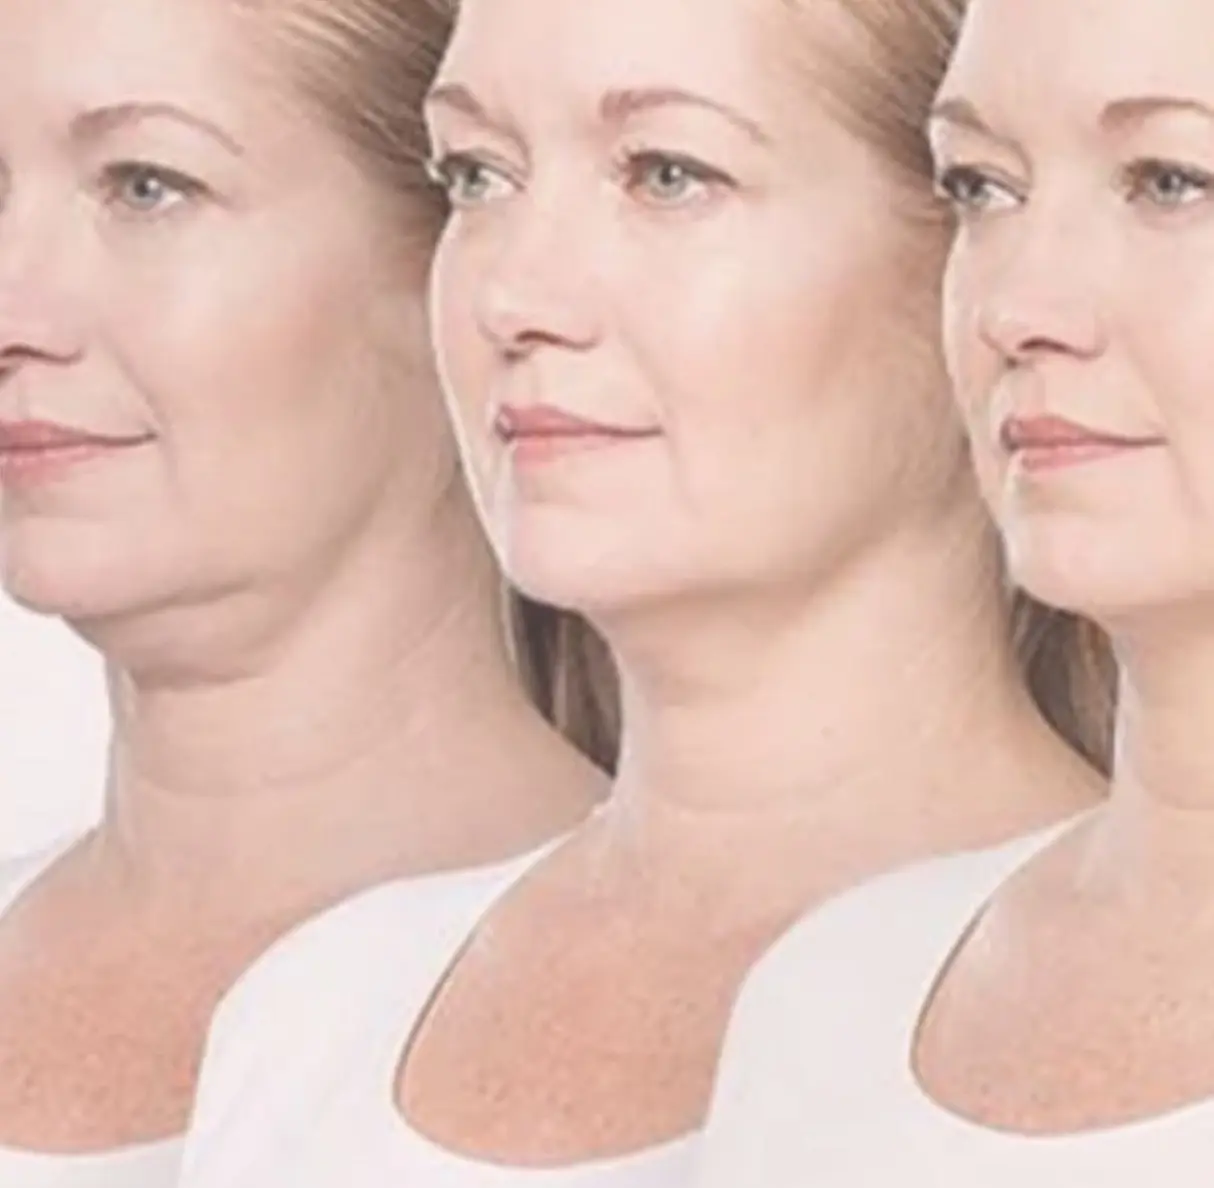 Three ladies with reducing chin size through using fat dissolving injections